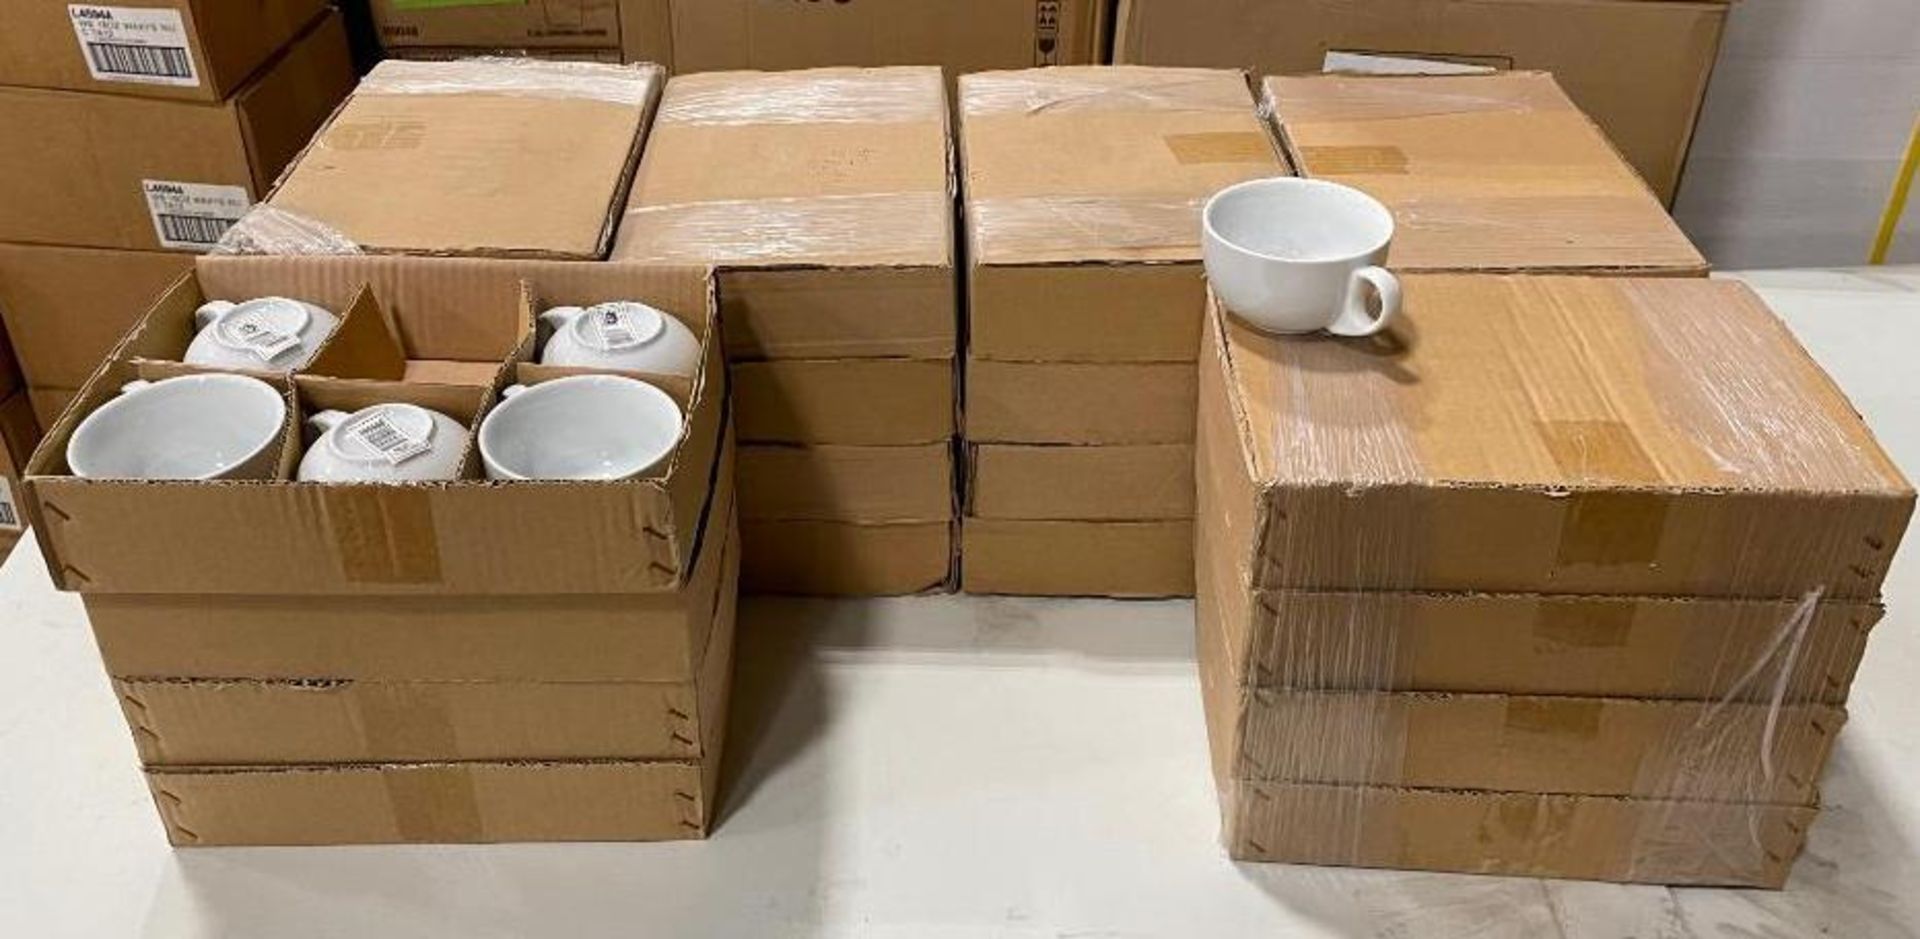 7 OZ. TAPERED COFFEE CUP, LOT OF 144, JOHNSON ROSE 90181 - NEW - Image 2 of 3